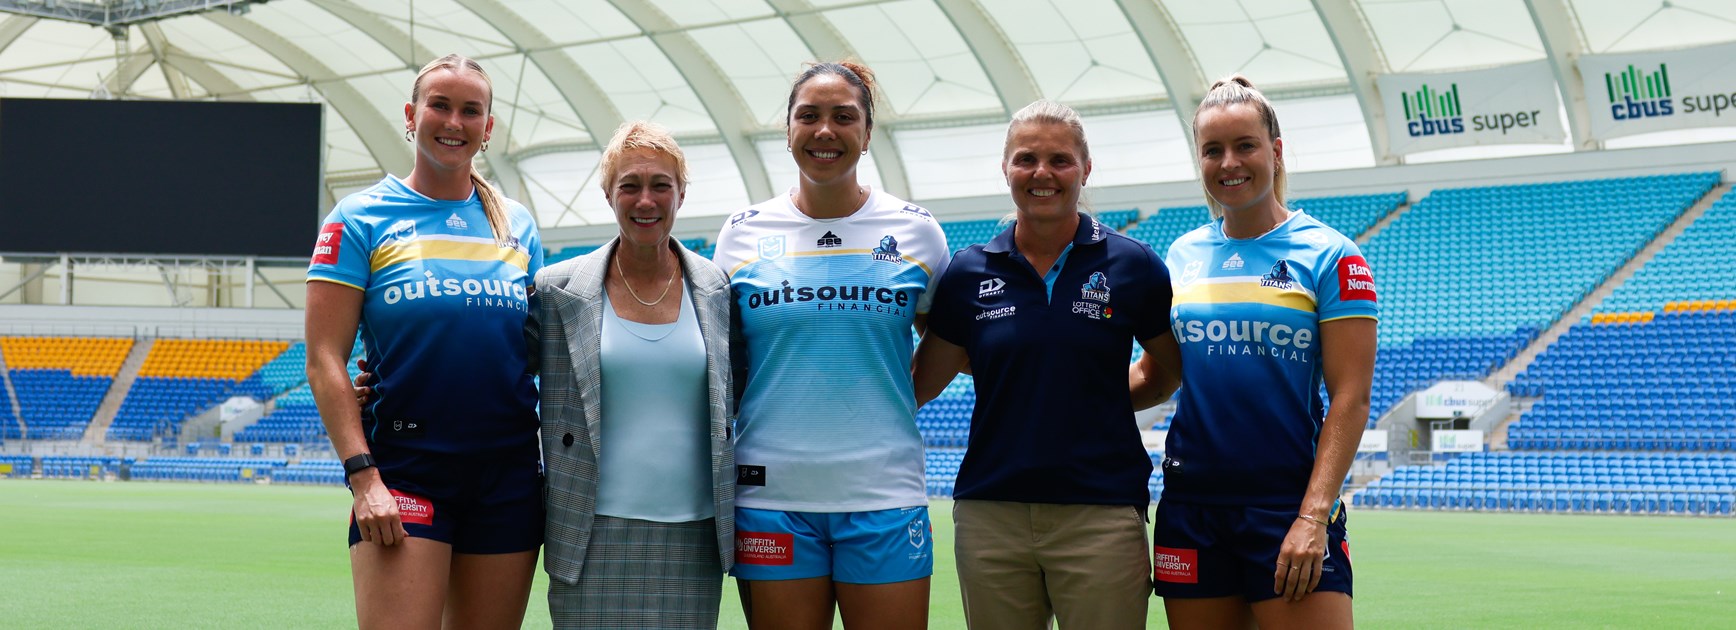 outsource Financial expand Titans NRLW investment with new major partnership